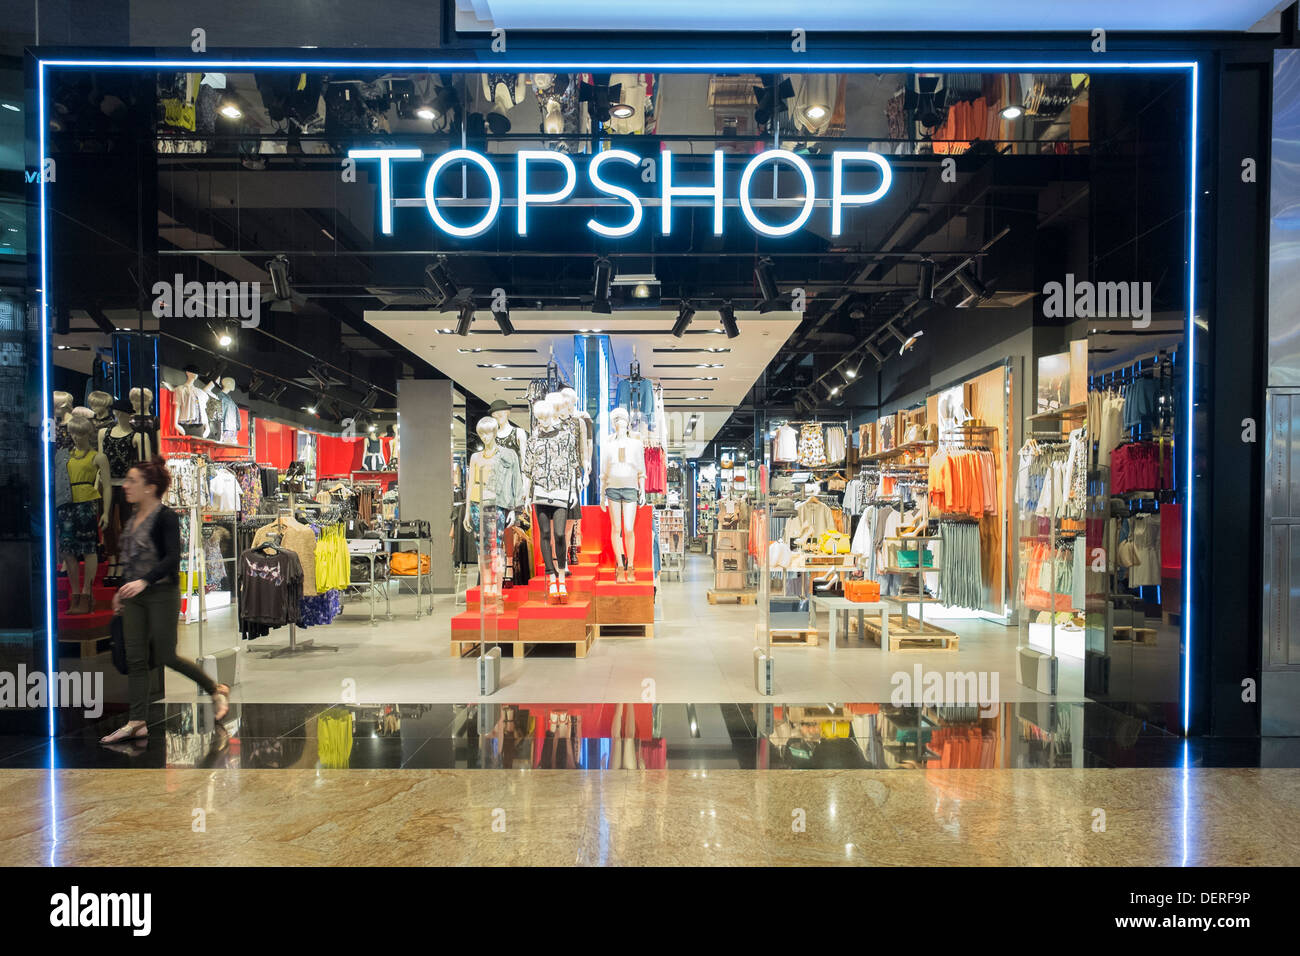 Topshop Store High Resolution Stock Photography and Images - Alamy